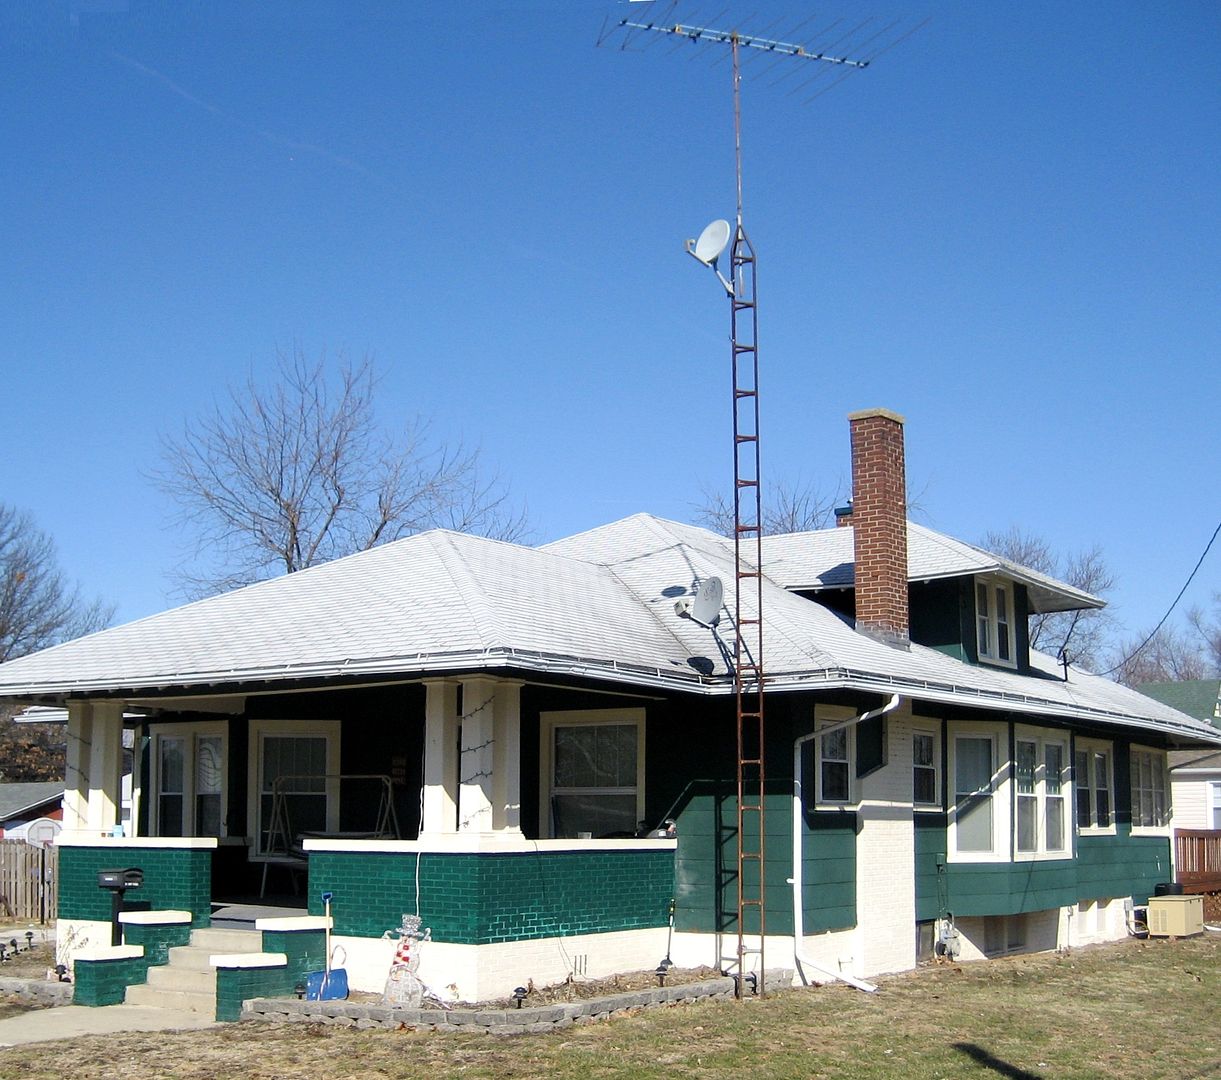 The best of both worlds: Large antenna mounted on Sears Avondale in Litchfield, Illinois